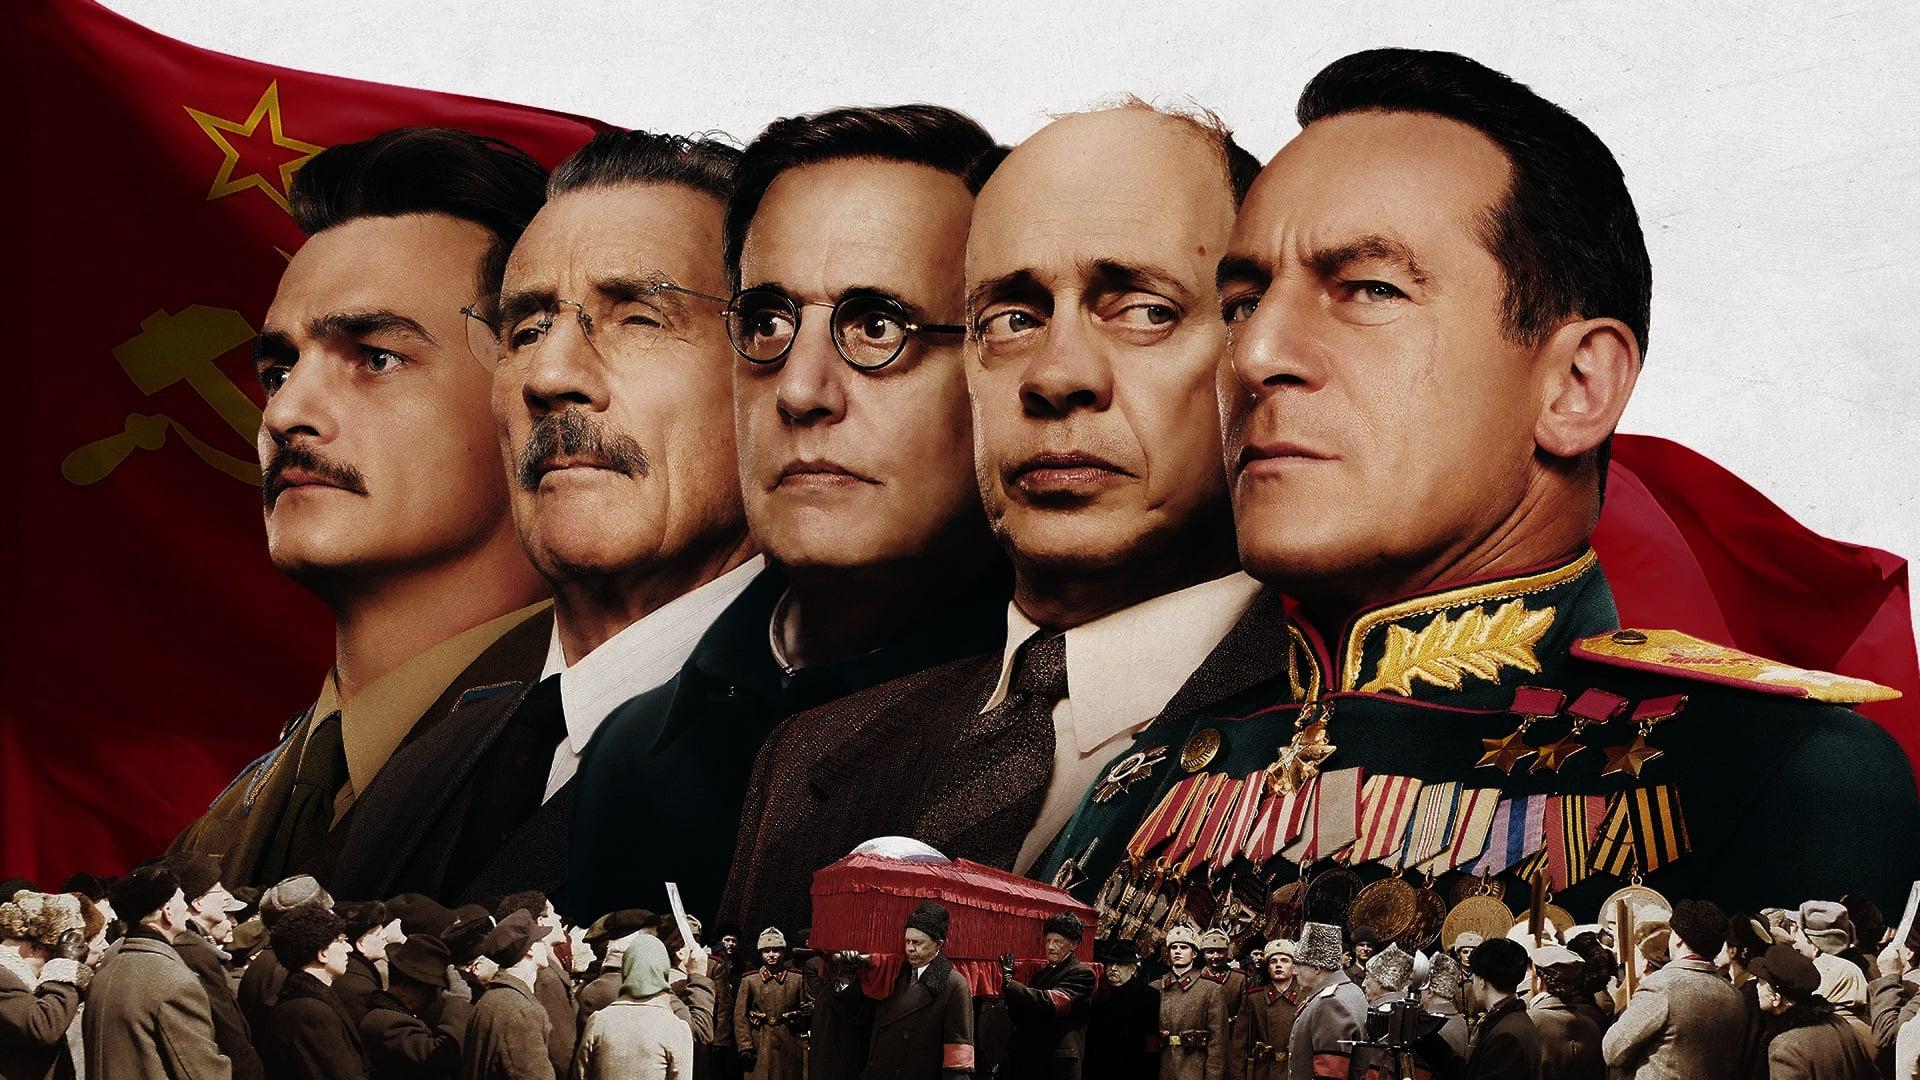 Backdrop Image for The Death of Stalin